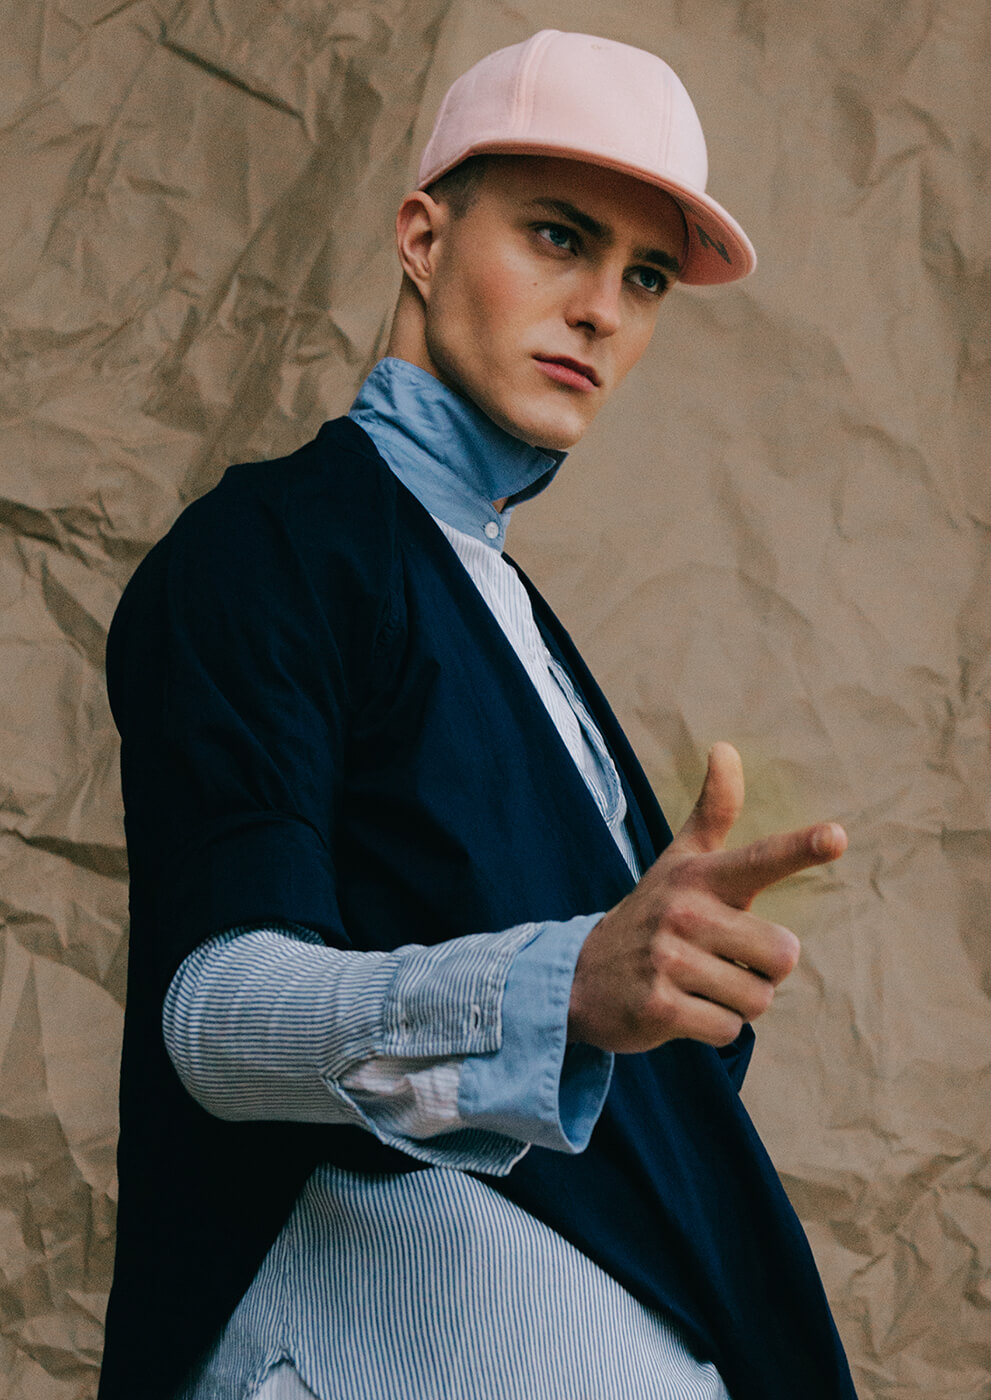 An editorial image of man posing in the studio wearing a cap and pointing at something